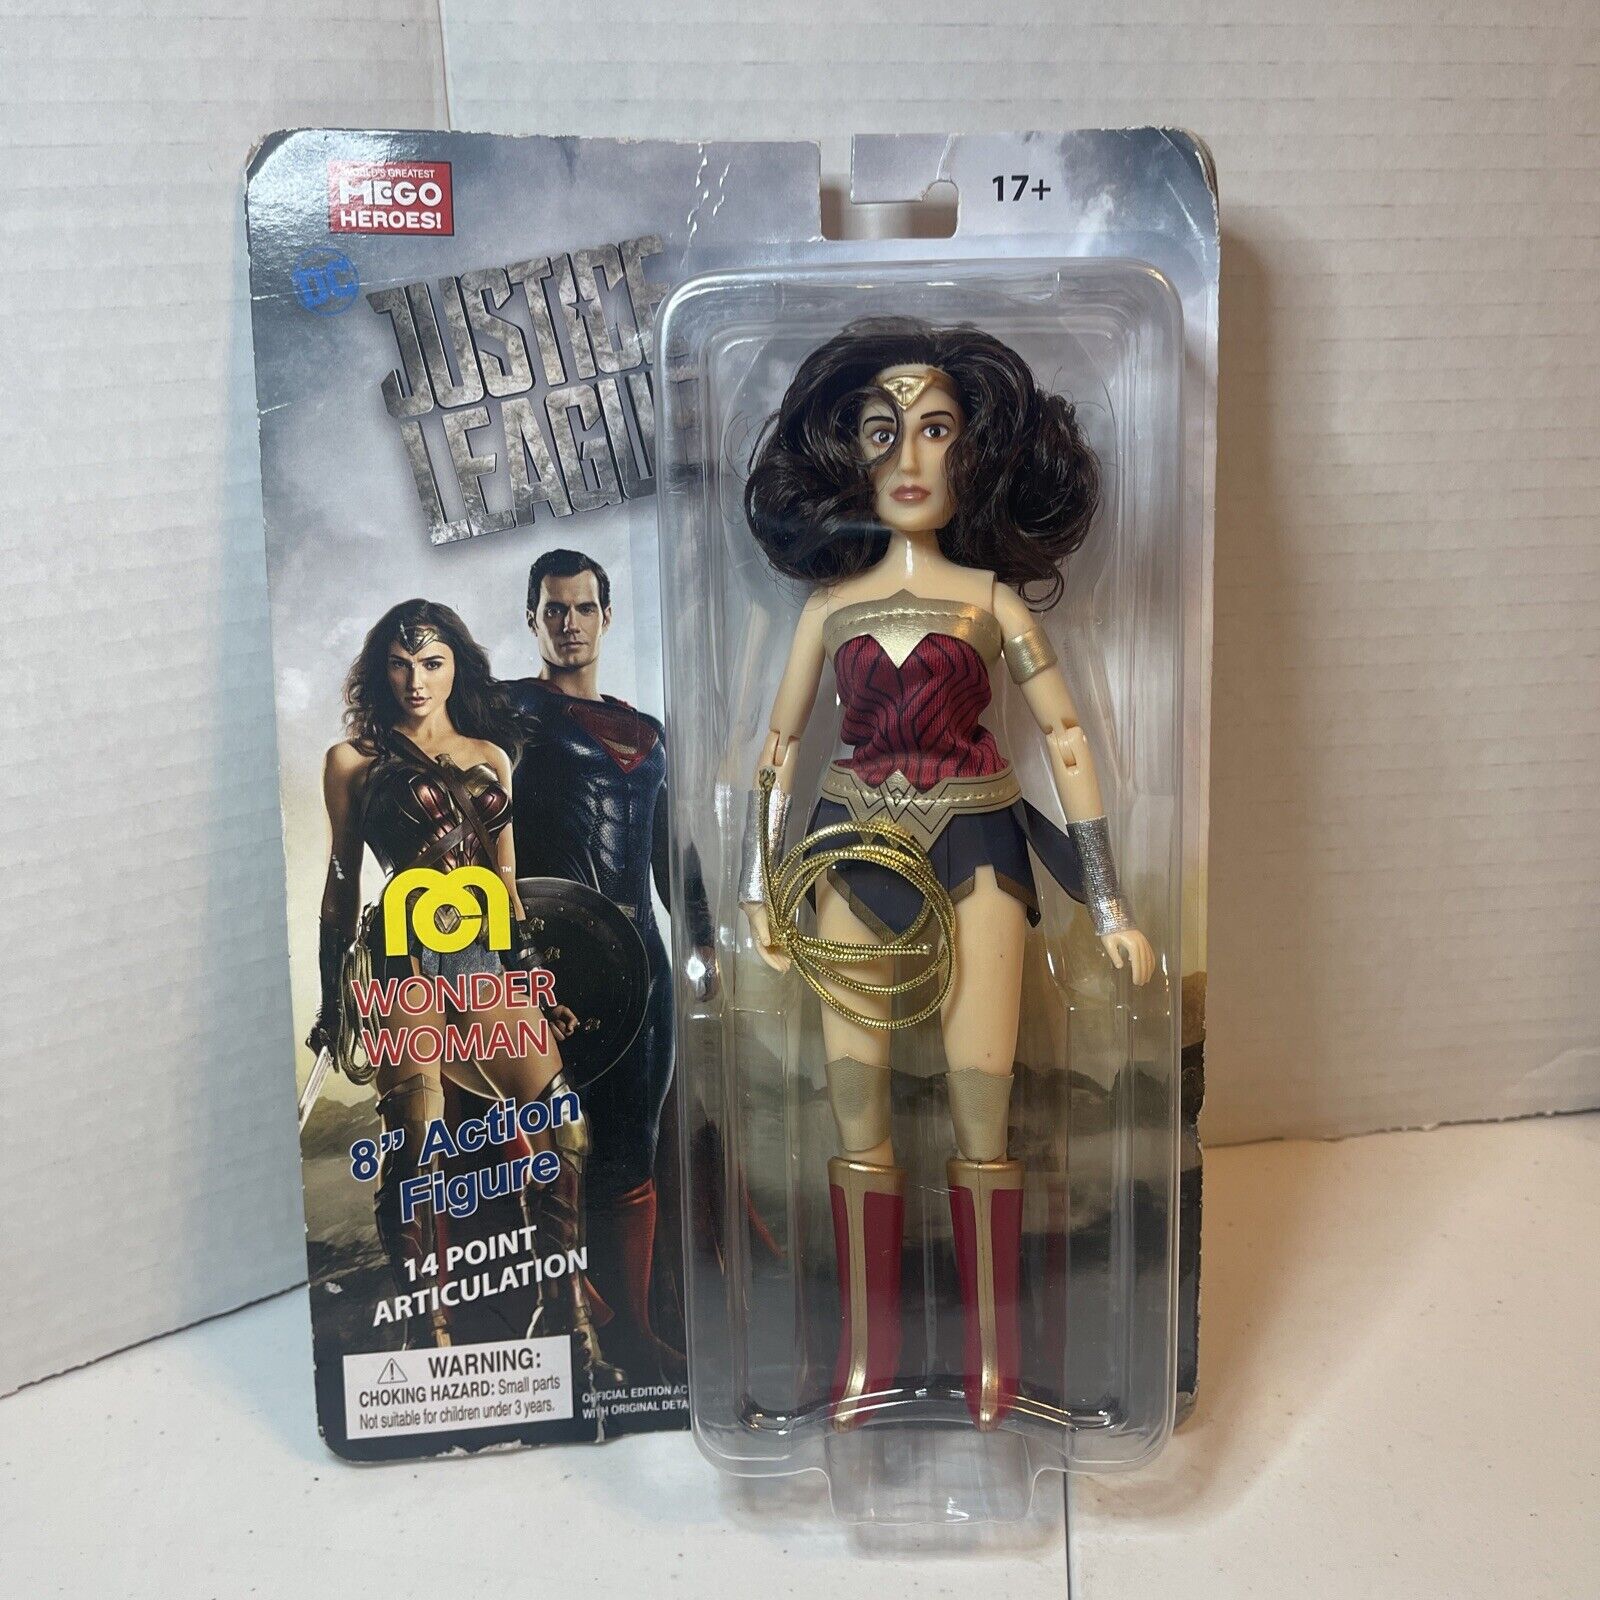 DC JUSTICE LEAGUE WONDER WOMAN MEGO Heros. 8 inch figure. New Sealed.